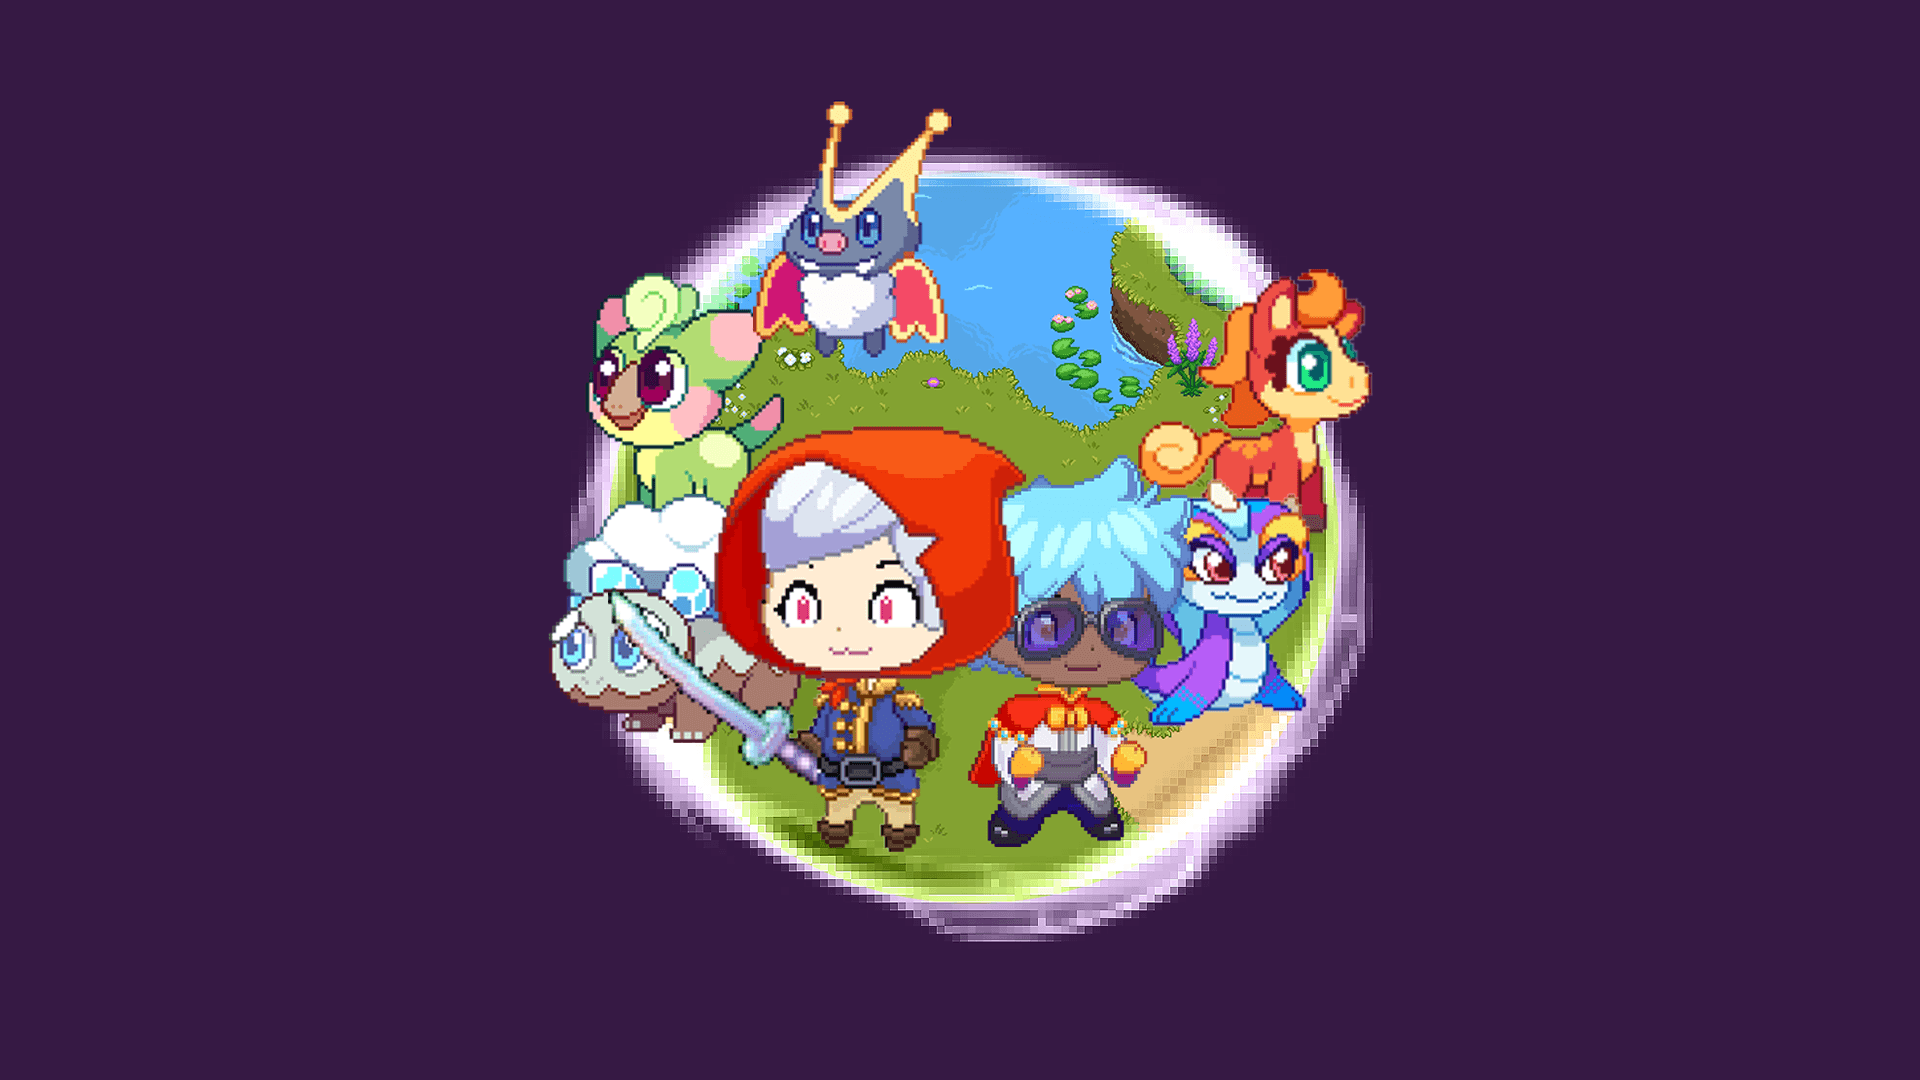 Featured image for the Prodigy Math Game Portal. Purple background that has a circle in the center, with an image inside of two Prodigy characters and five Prodigy pets in the background.